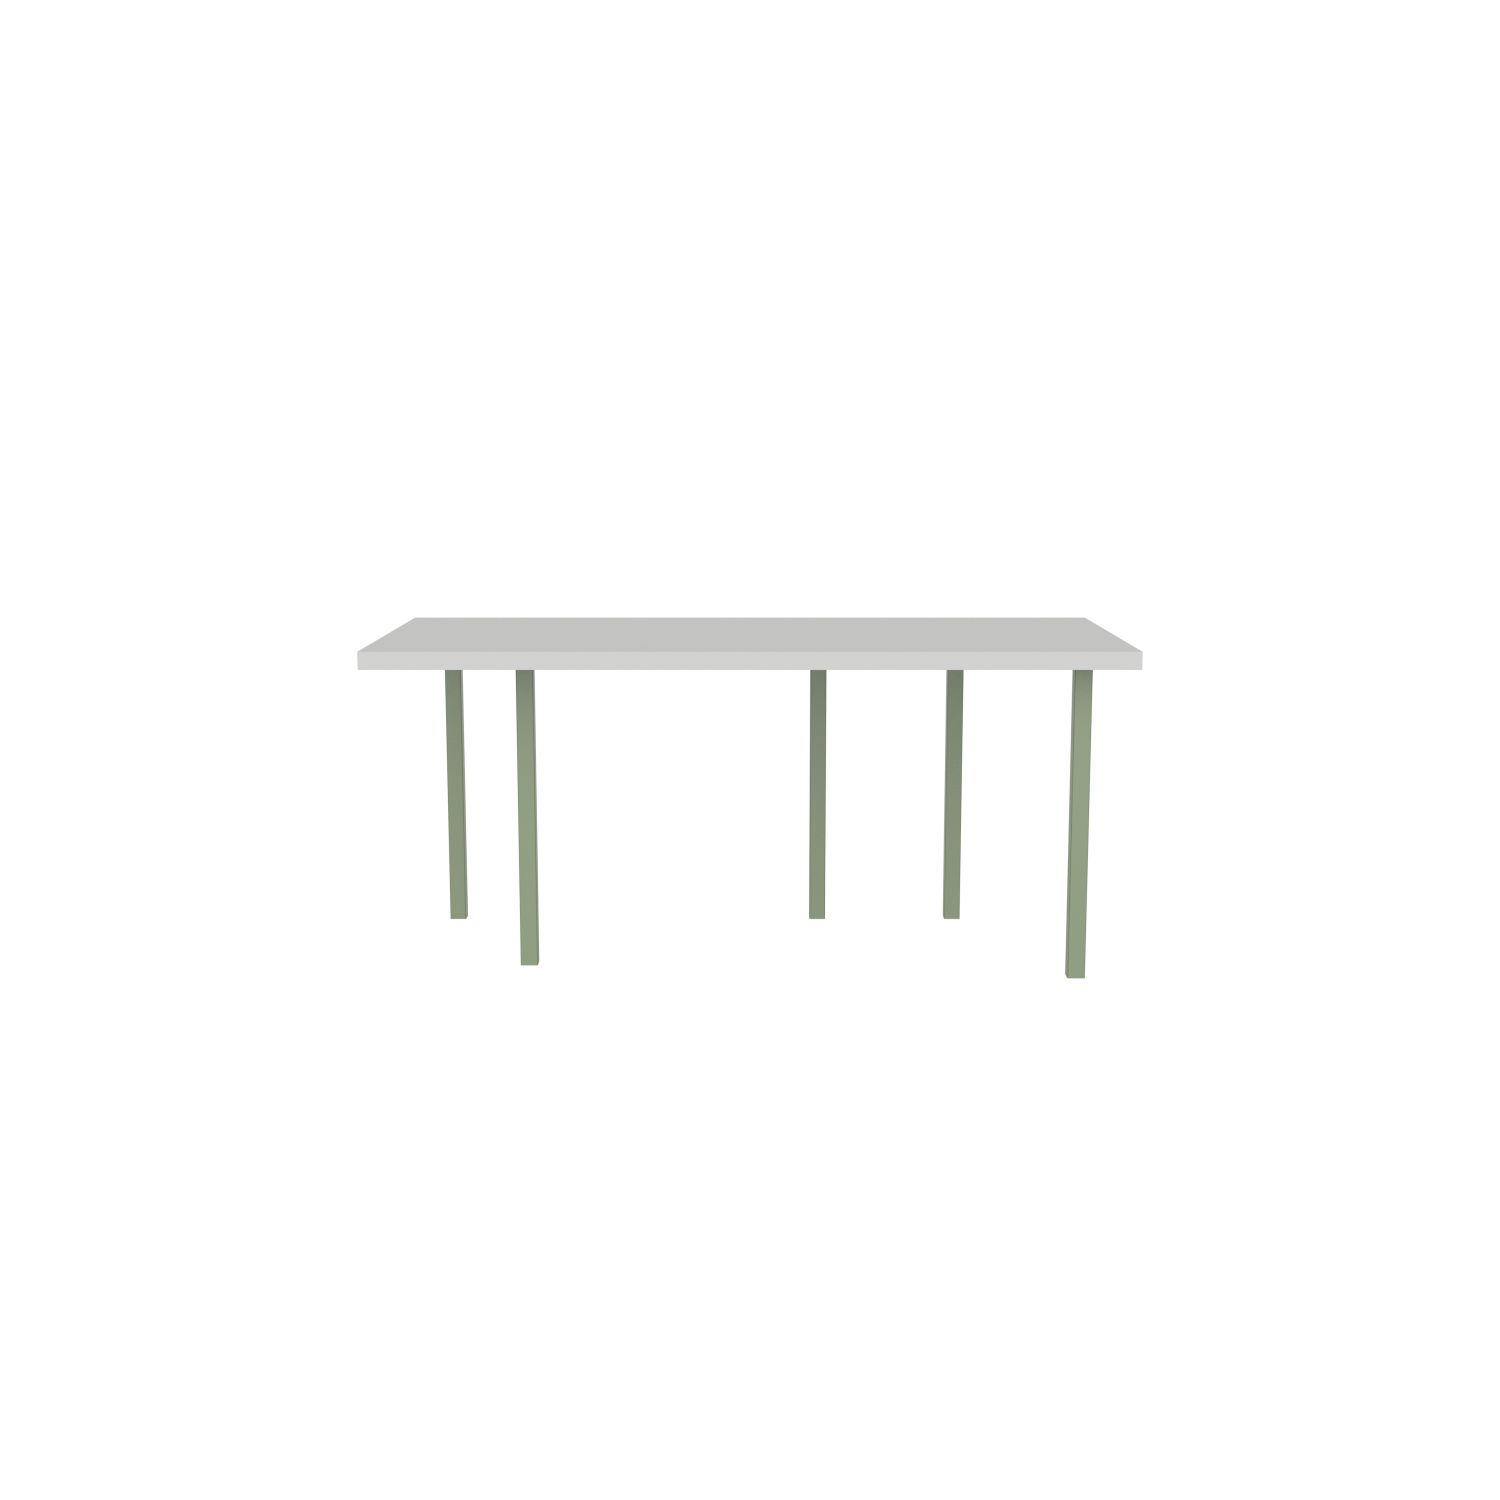 lensvelt bbrand table five fixed heigt 80x172 hpl white 50 mm price level 1 green ral6021